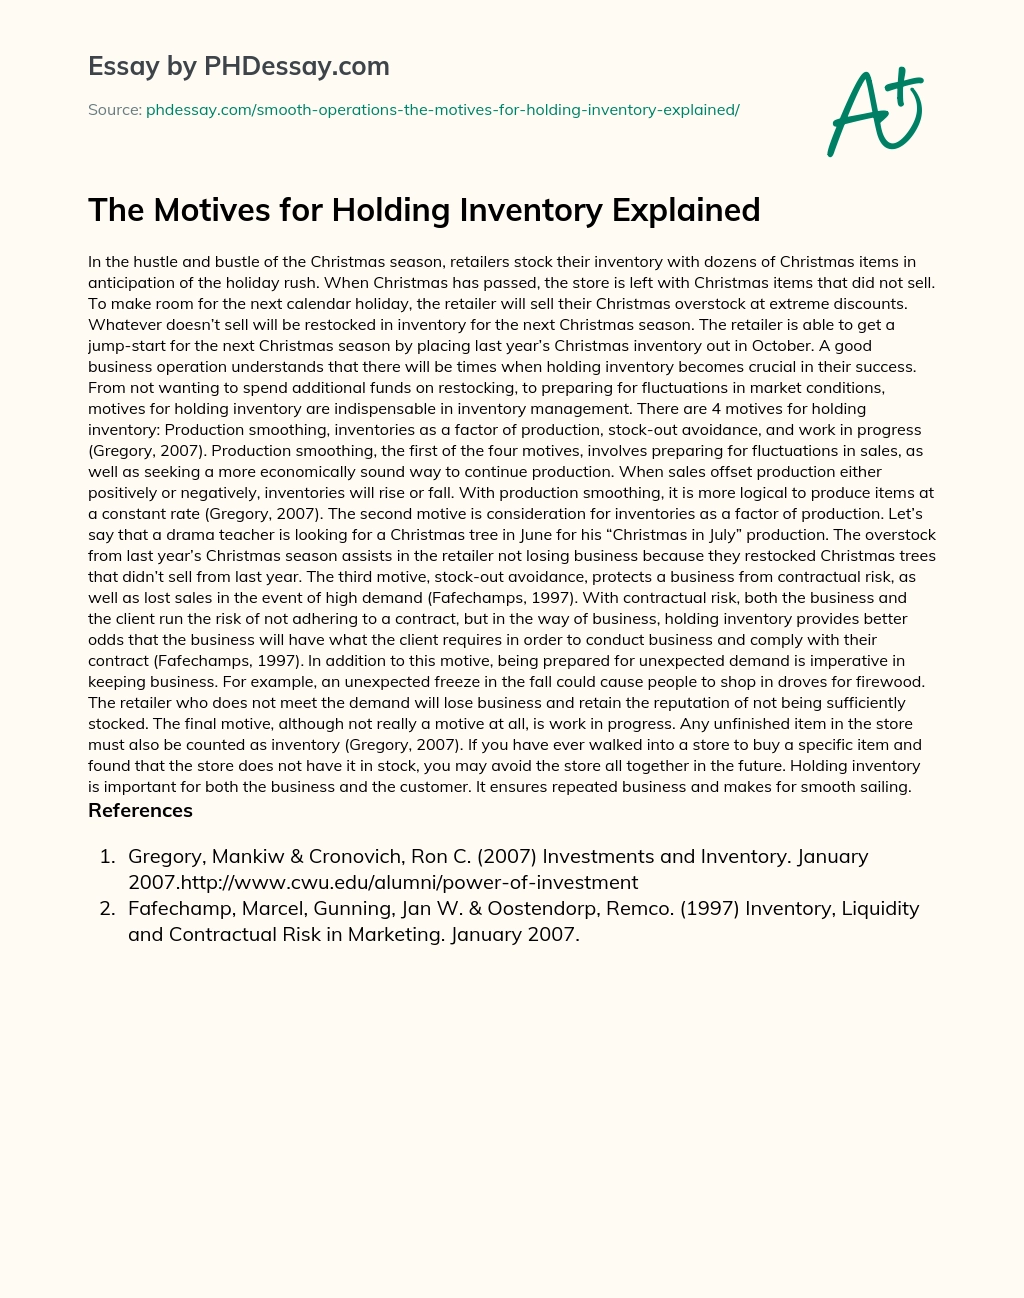 The Motives for Holding Inventory Explained essay